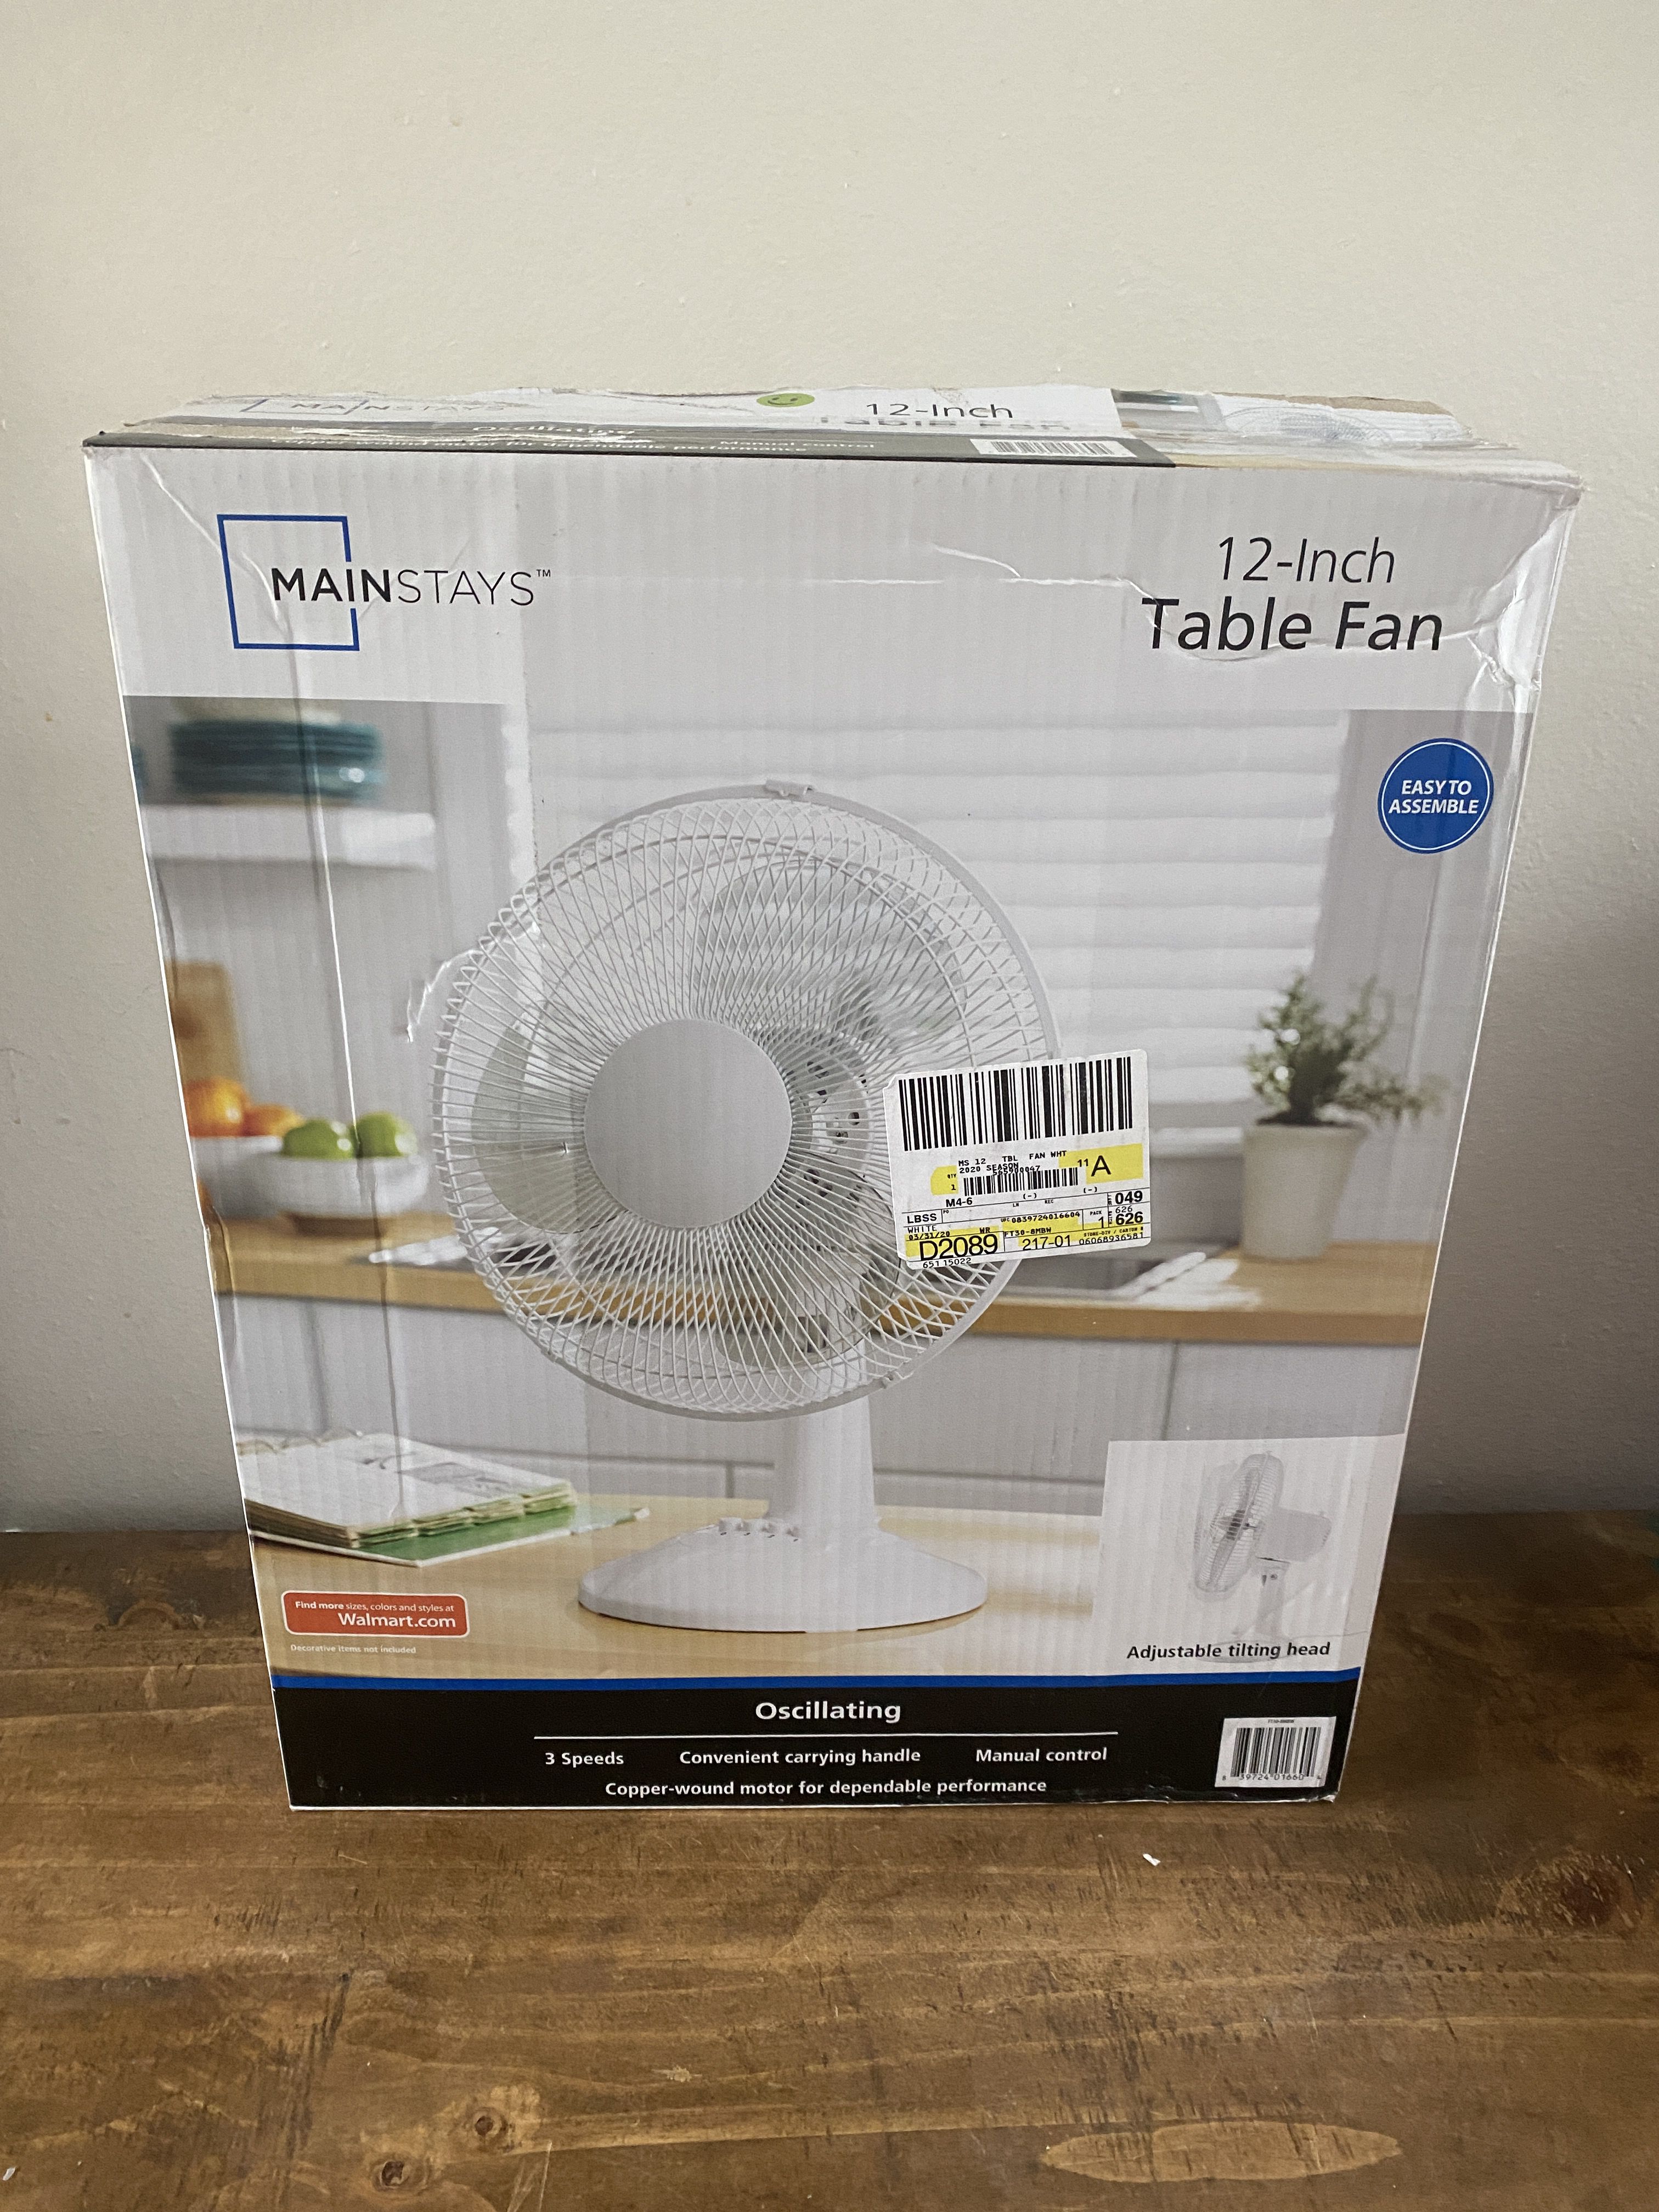 Mainstays 12" 3-Speed Oscillating Table Fan, Model## FT30-8MBW, White